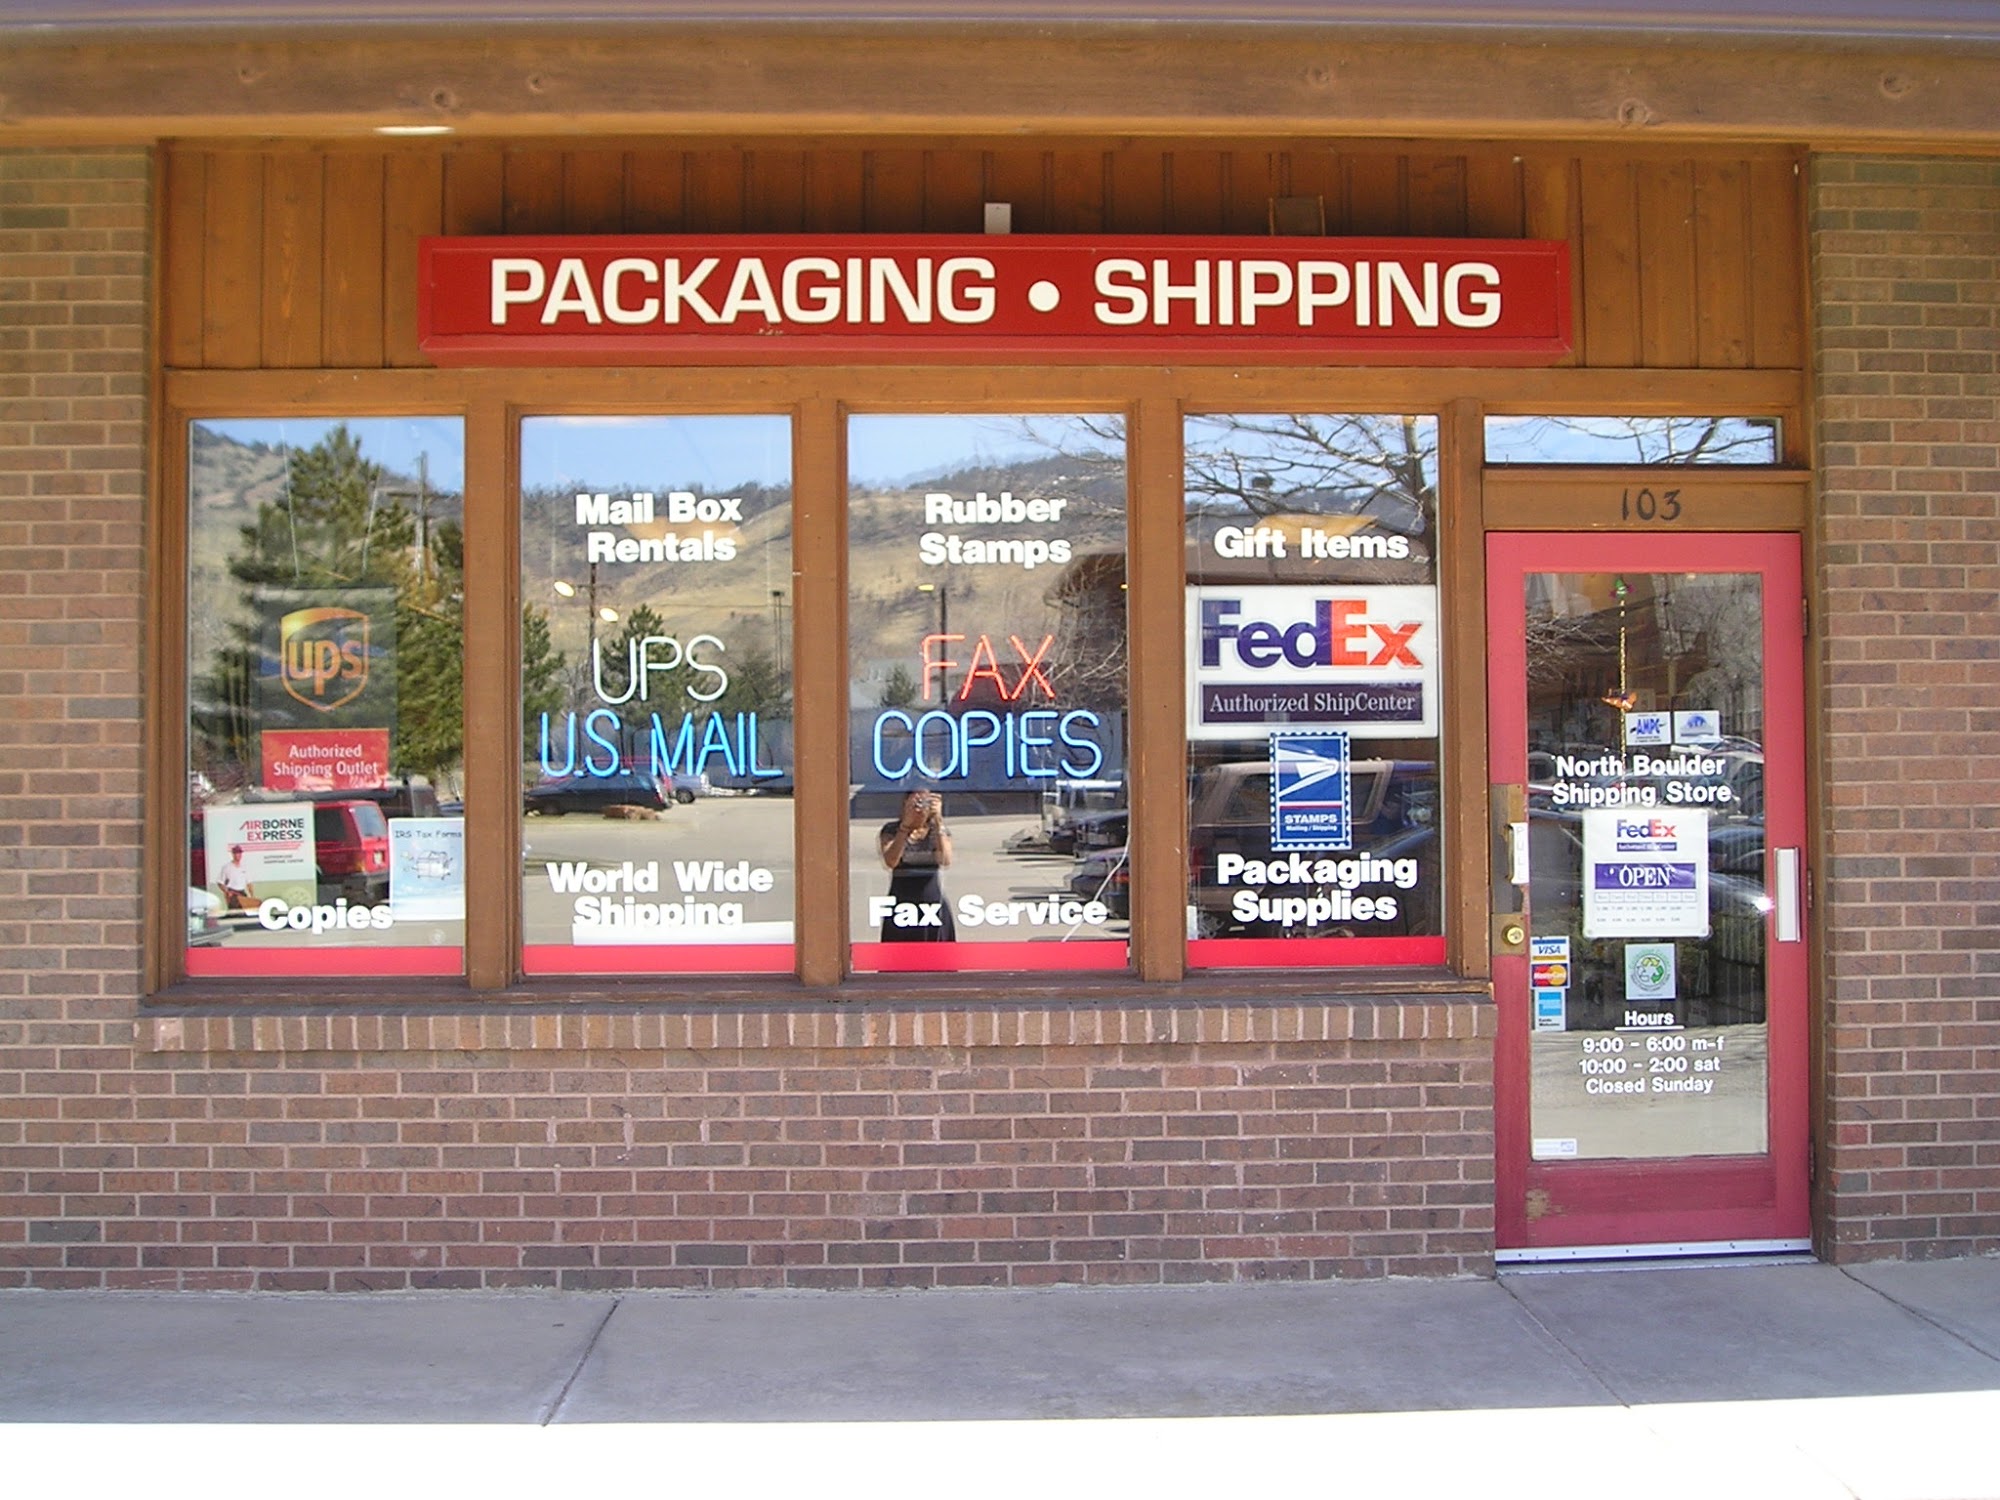 North Boulder Shipping Store